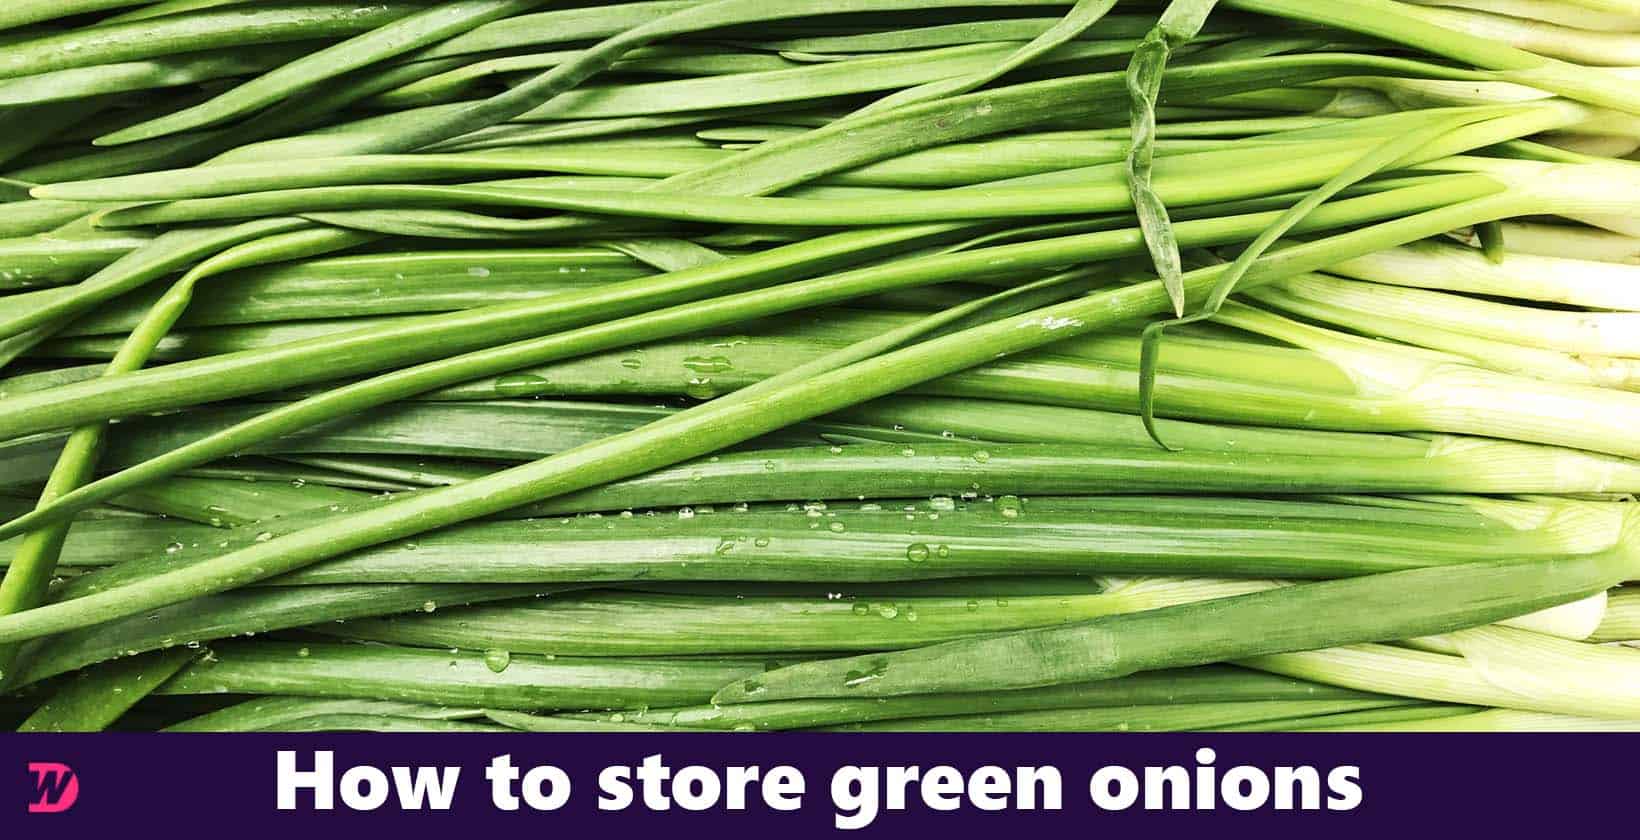 Storing green onions